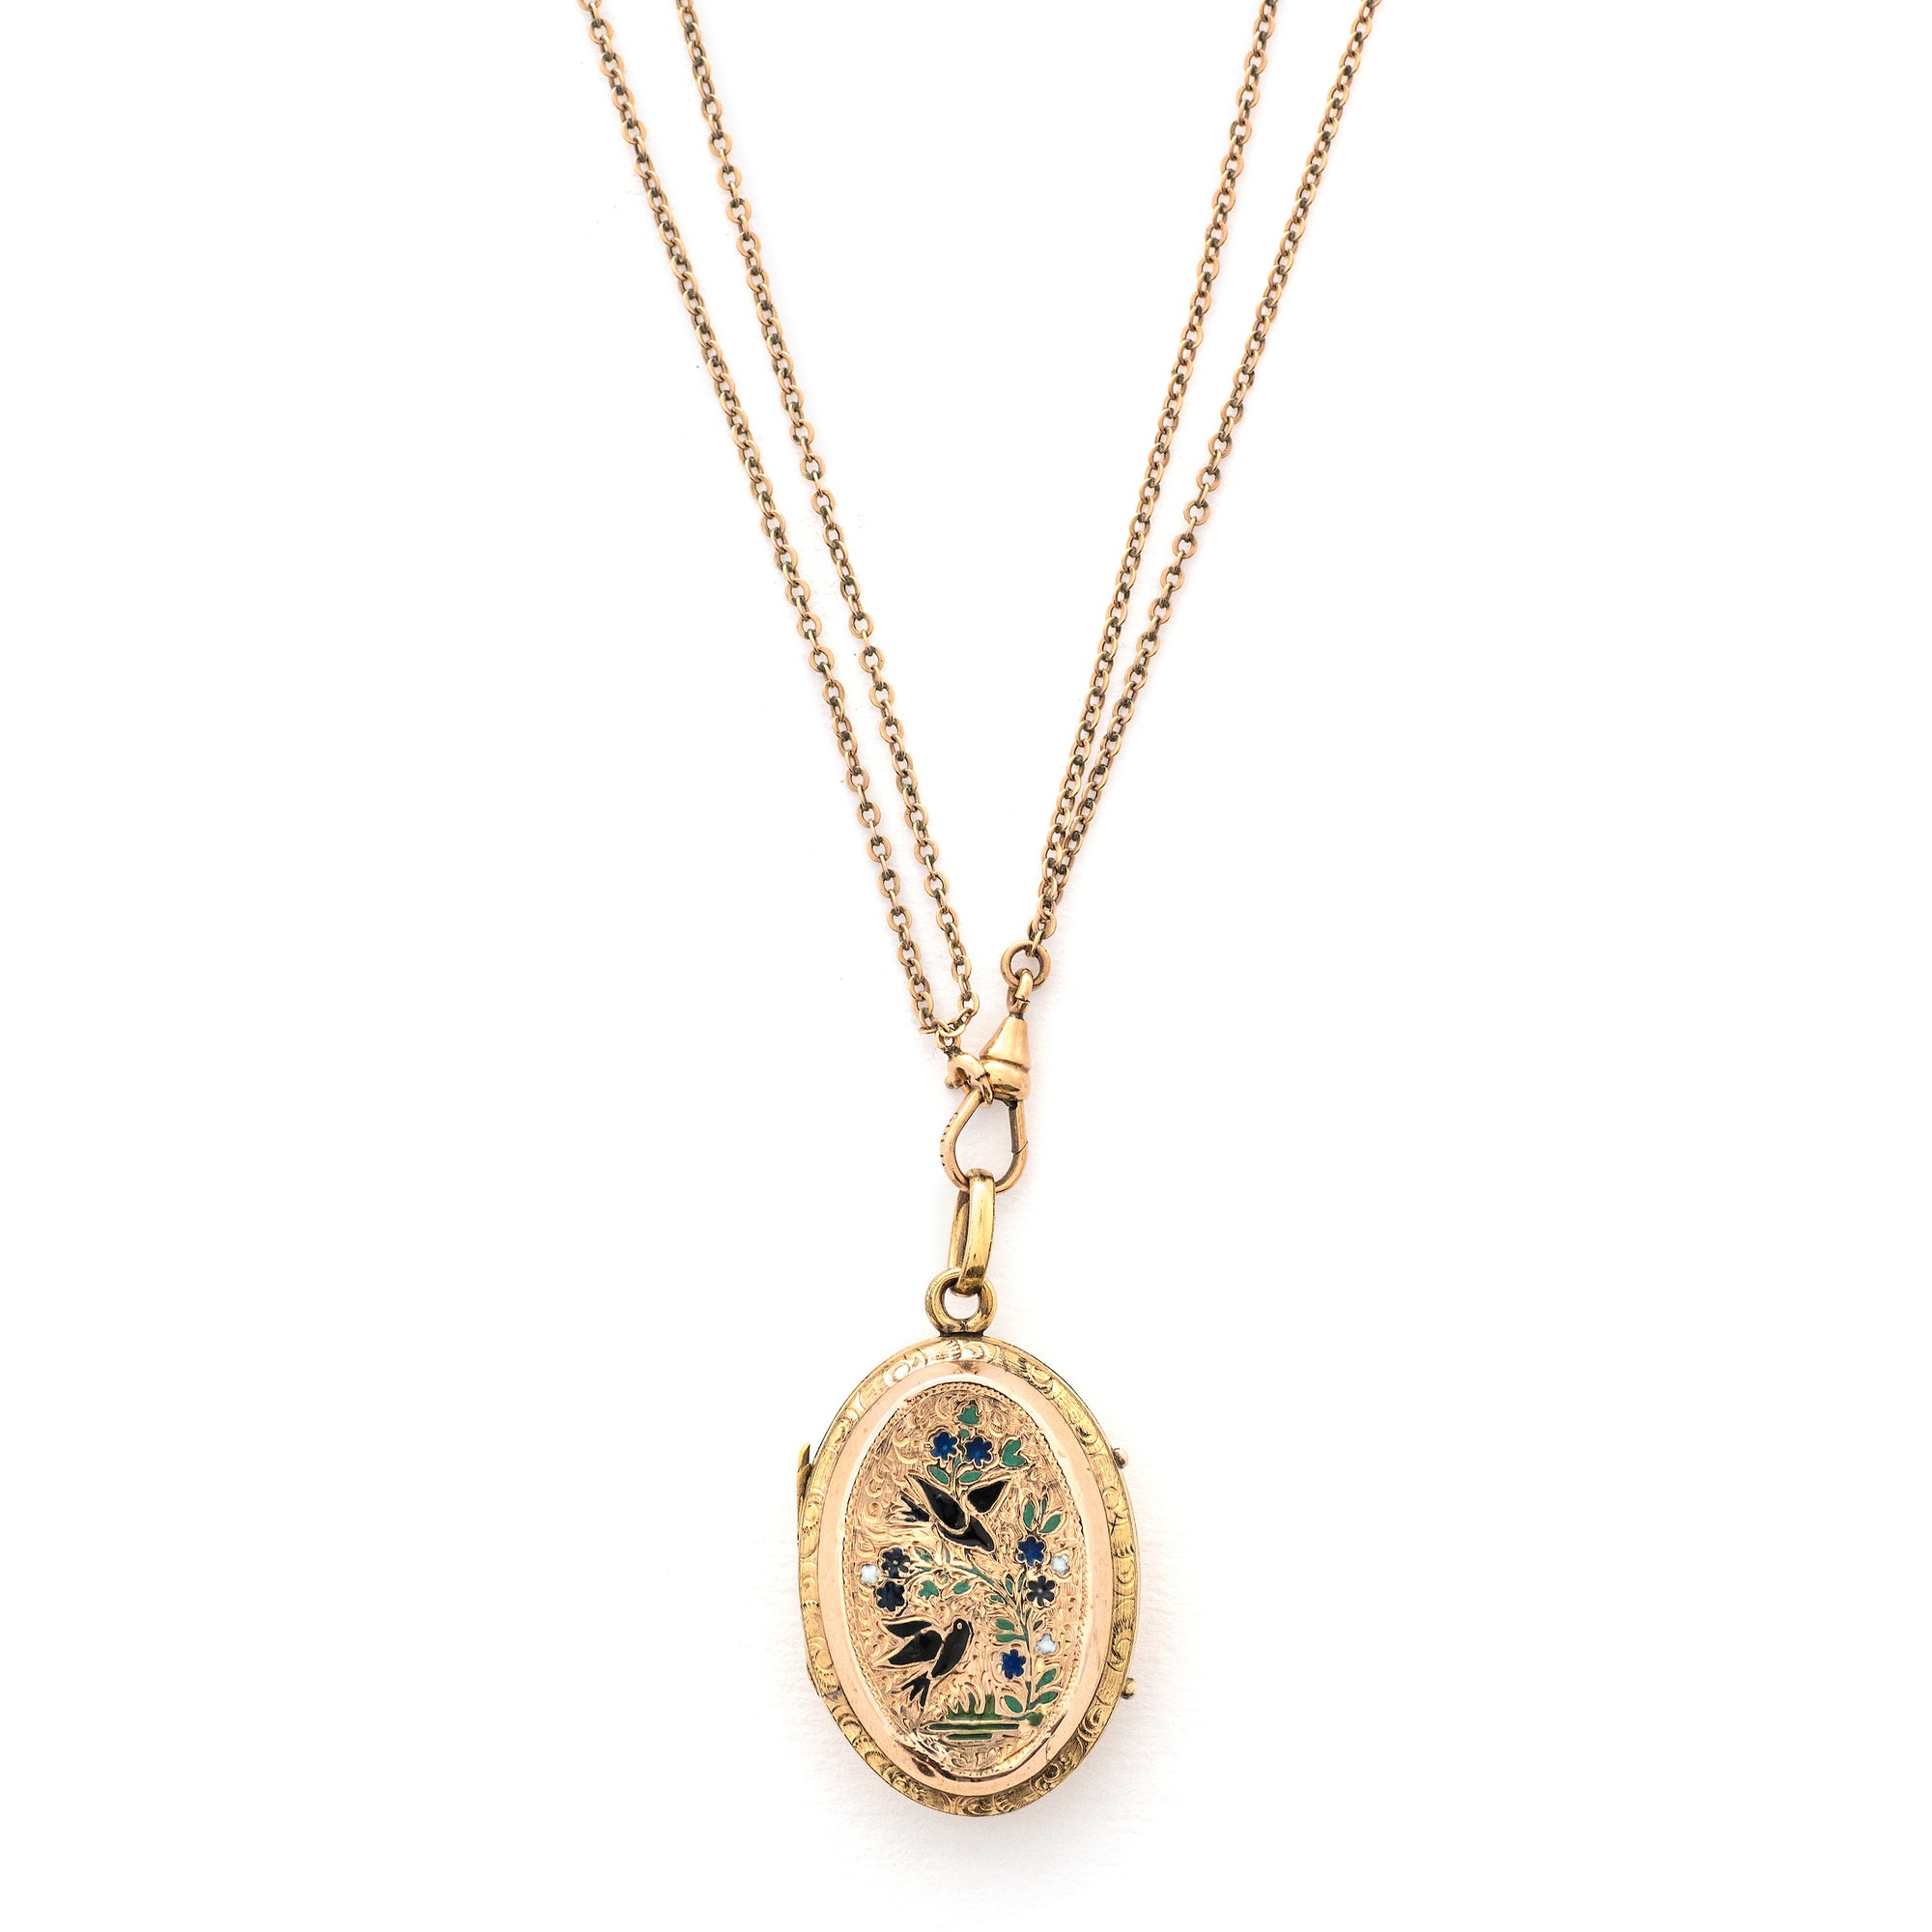 This striking oval locket features classic Victorian era symbolism with a pair of swallows surrounded by forget-me-not flowers enhanced with blue, white and green enamel throughout the design. It opens to hold two photos and pairs perfectly with one of our antique gold fill chains.  Front Locket View